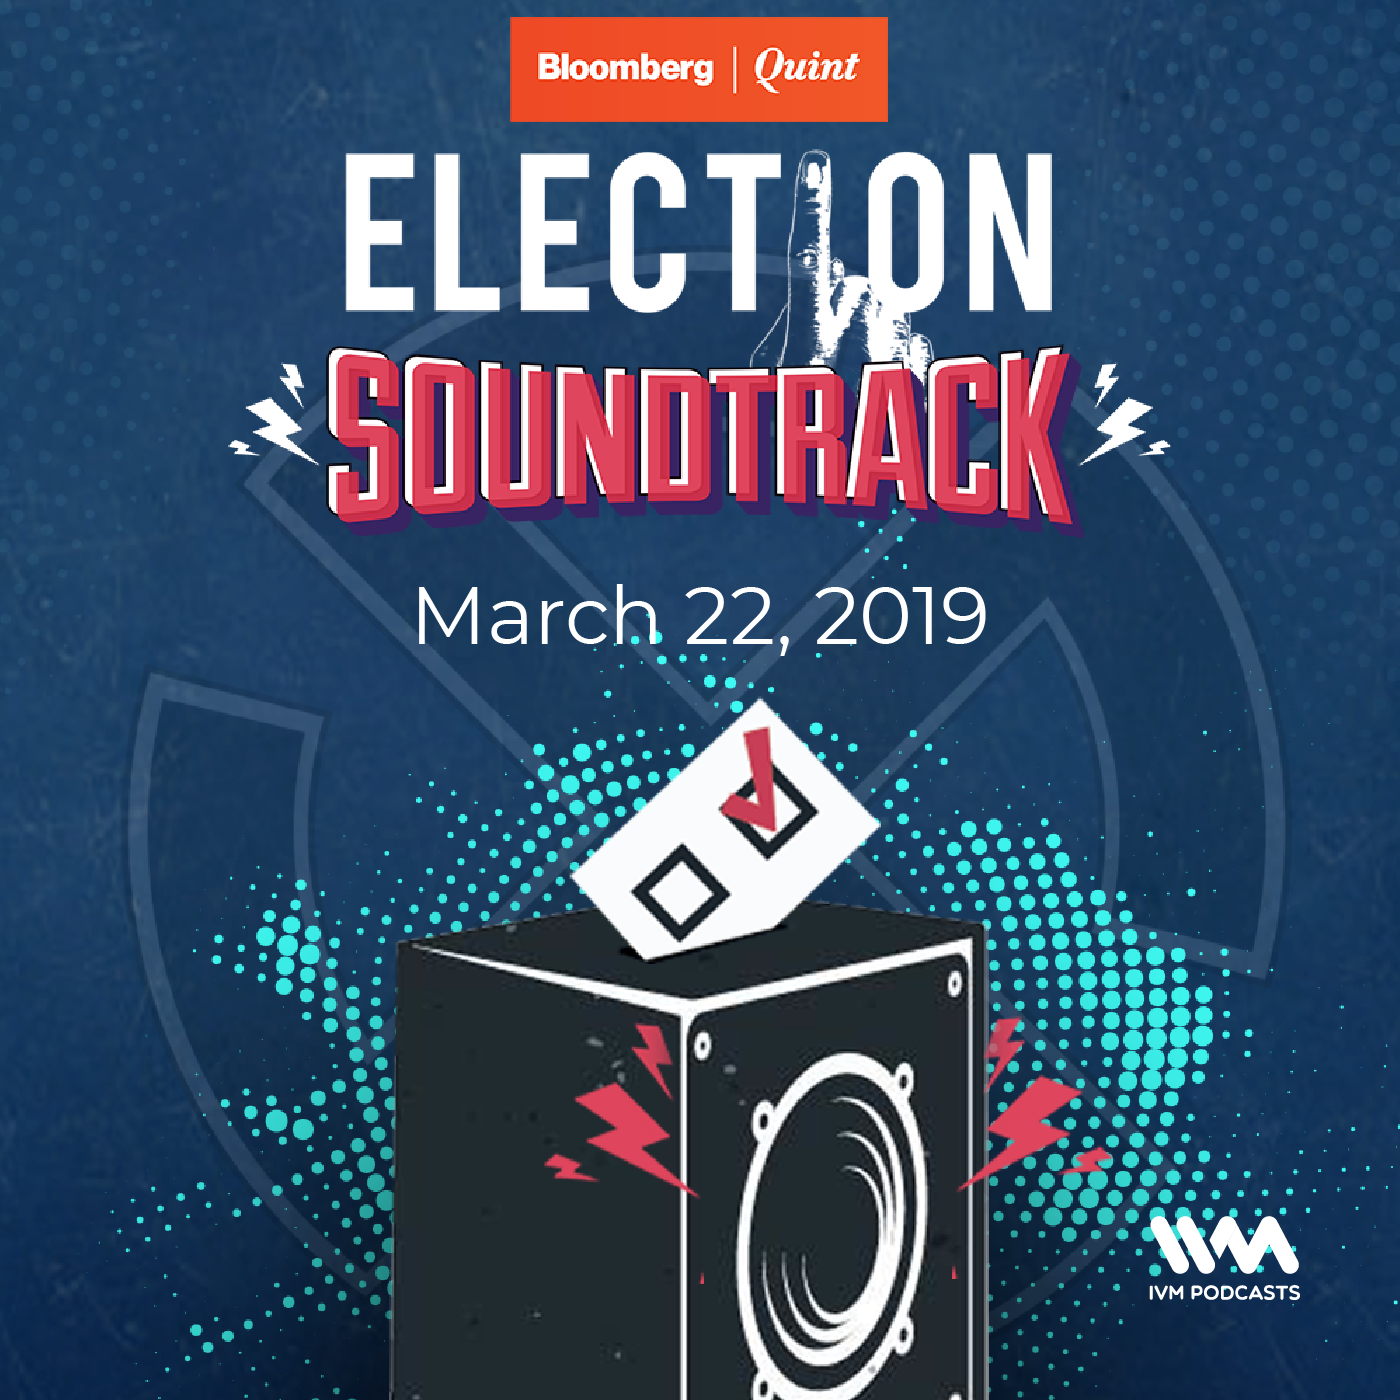 Ep. 04: Election Soundtrack: Corruption Charges And Loose Cannons